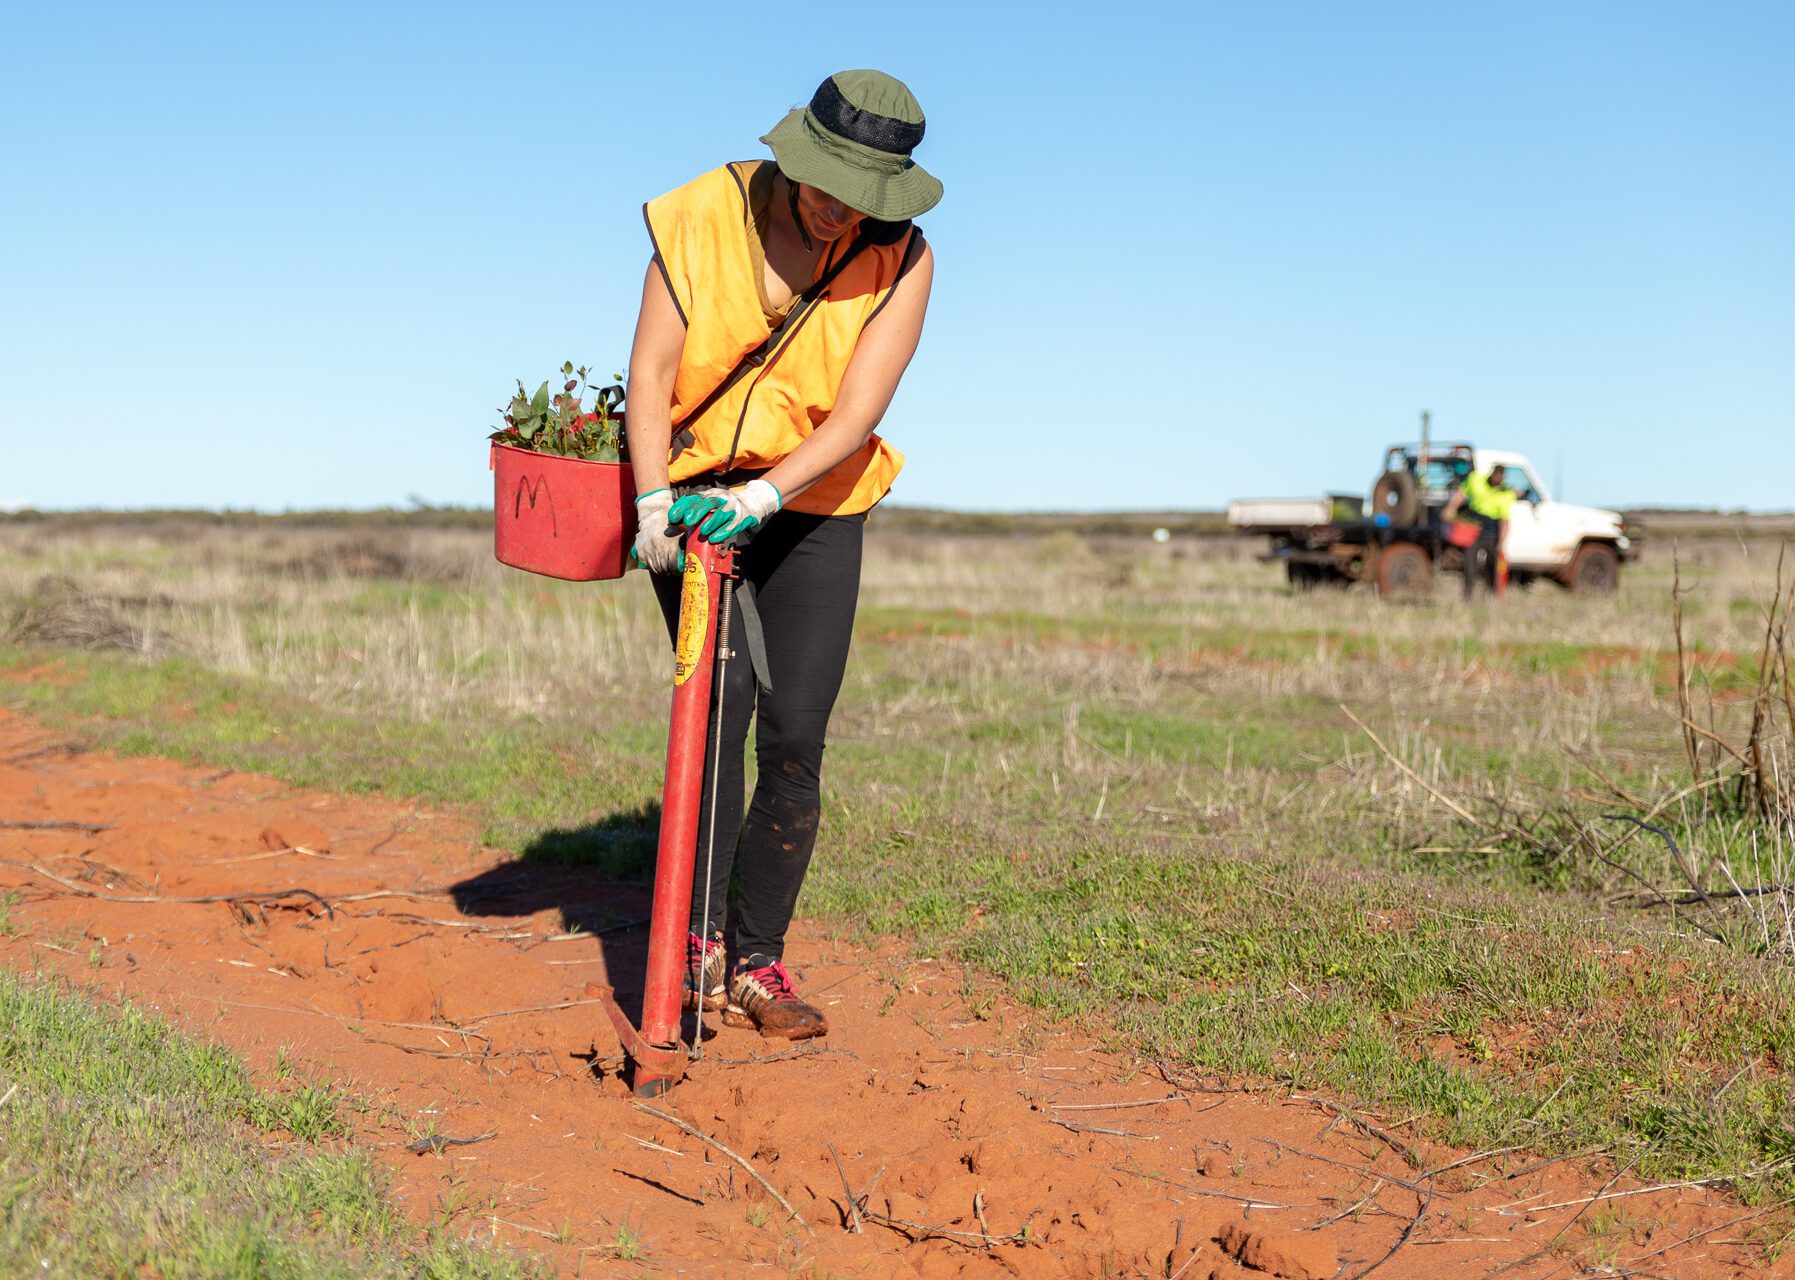 Woman in a hat and high-vis standing in a field, bending over a pottiputki planting tool.